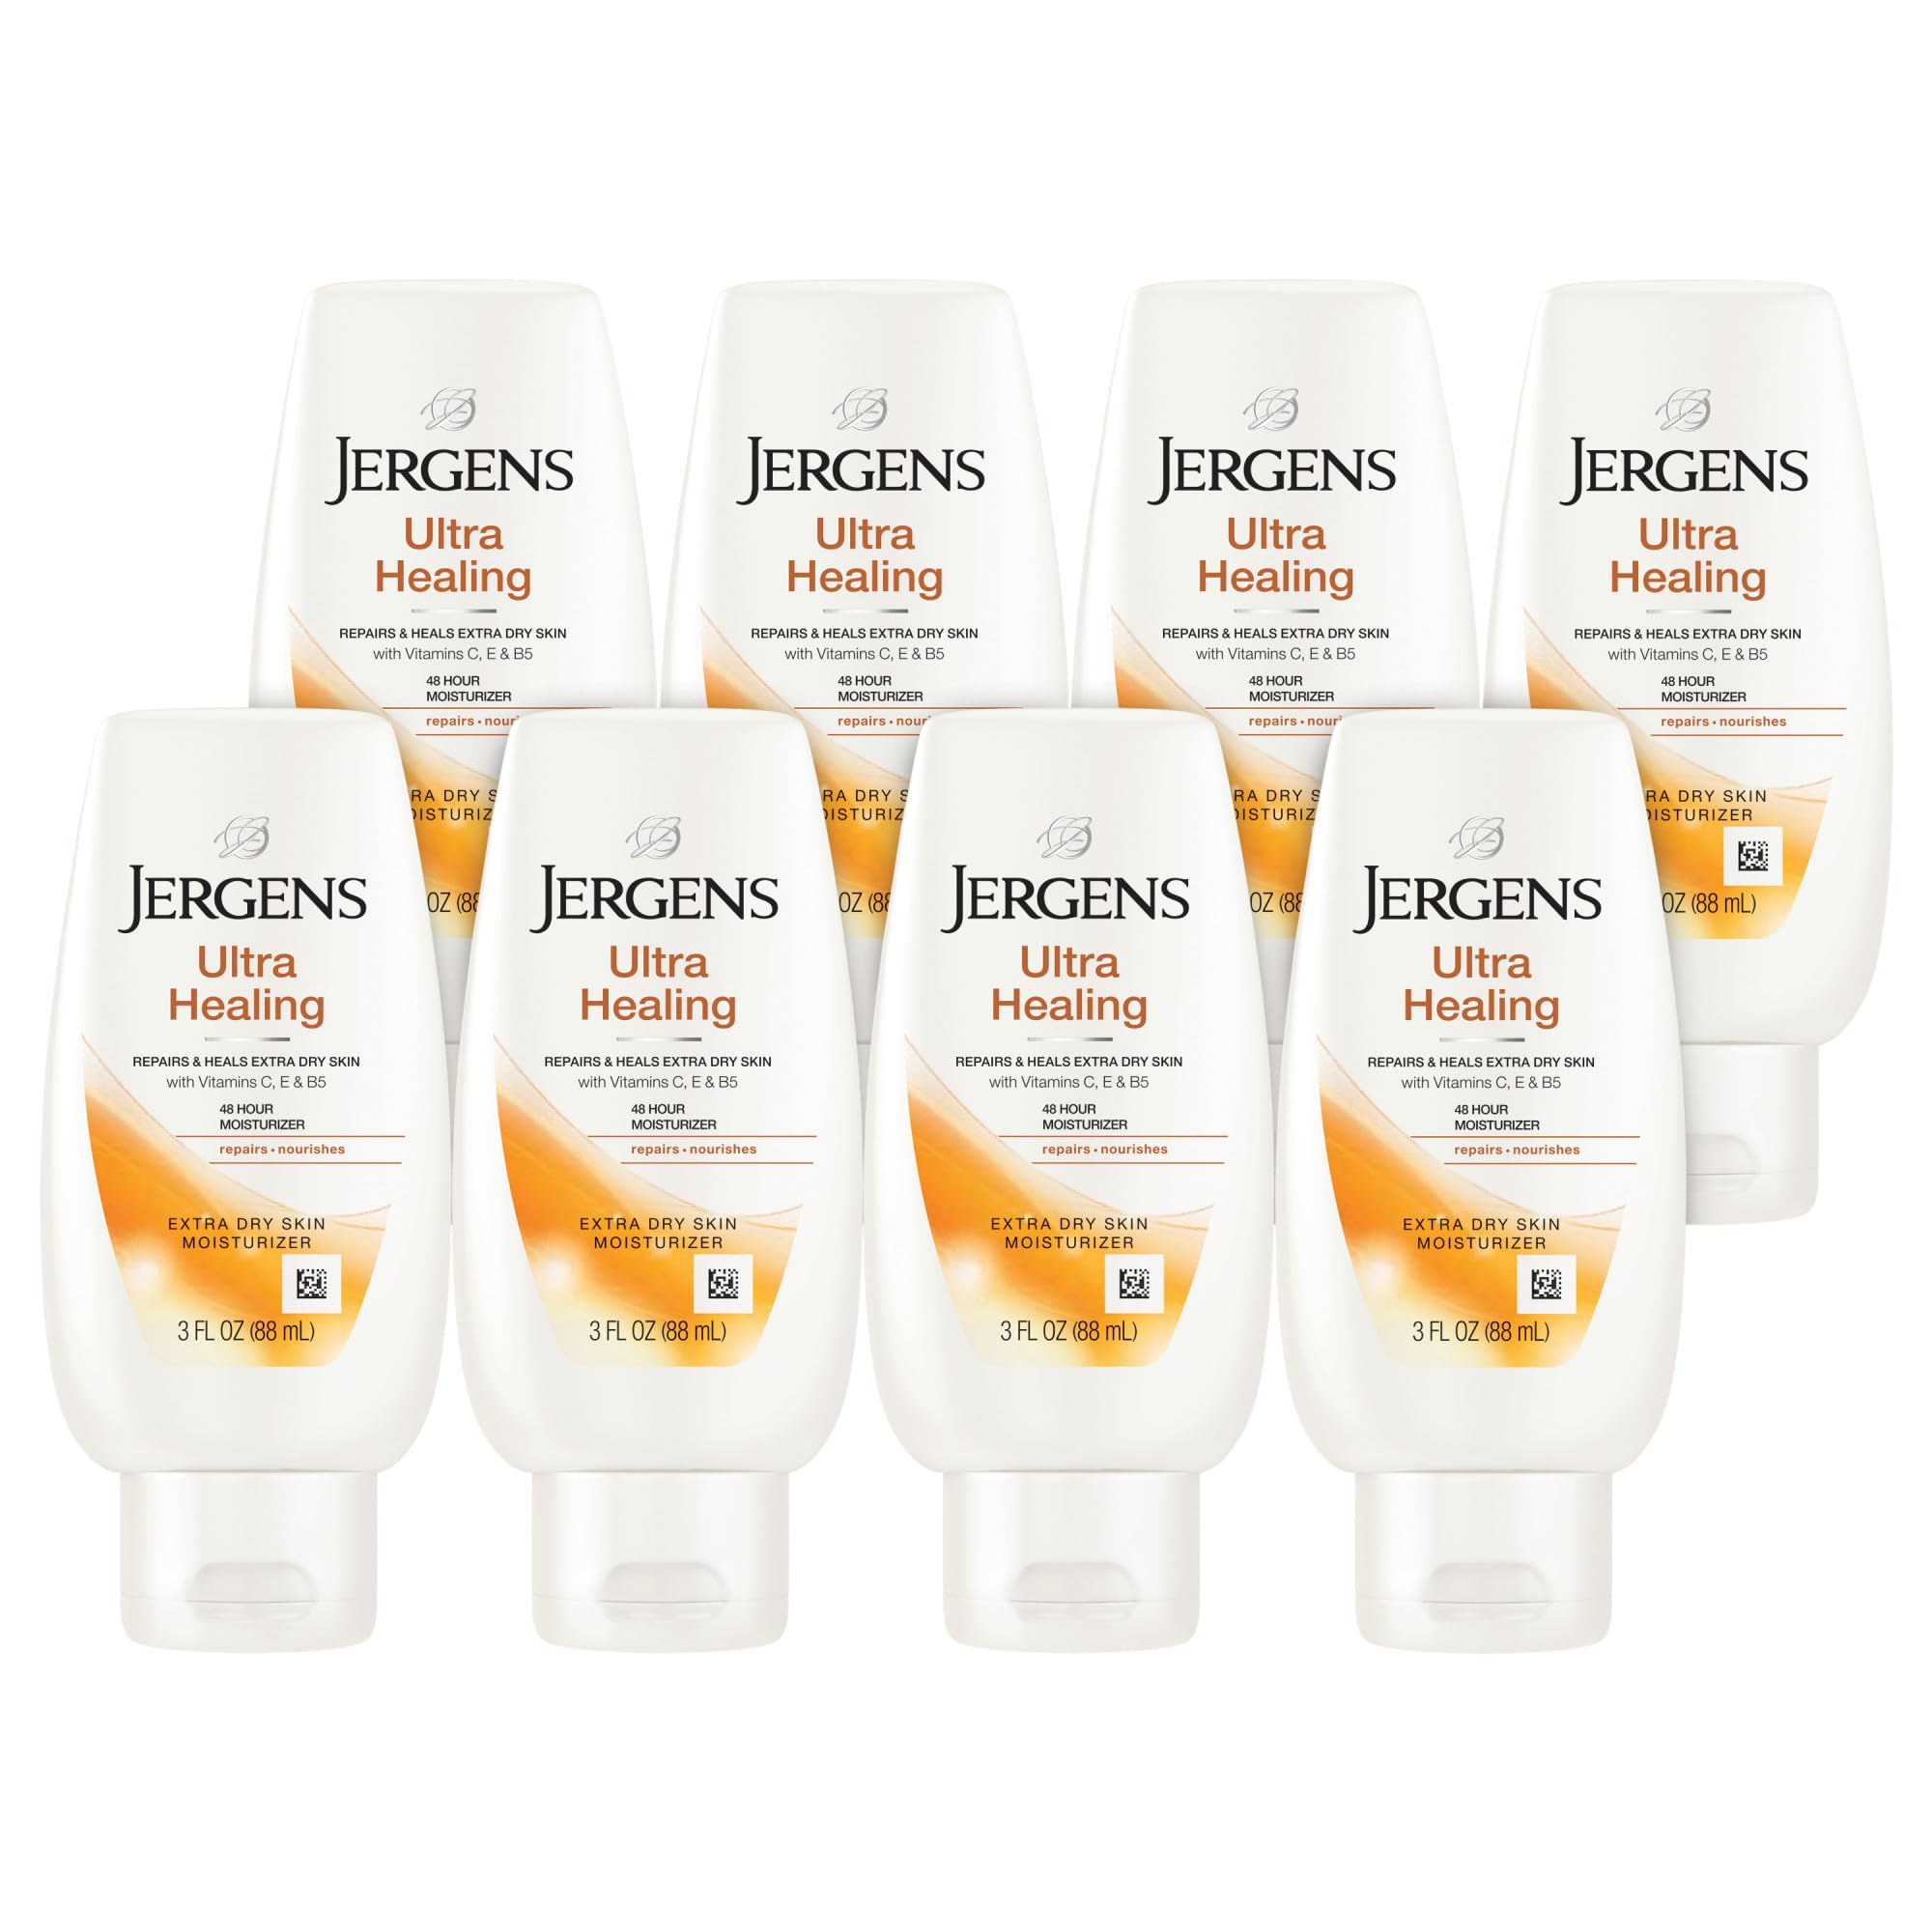 Jergens Ultra Healing Dry Skin Moisturizer, Body Lotion, Extra Dry Skin, Vitamins C, E, and B5, 3 Oz (Pack of 12)